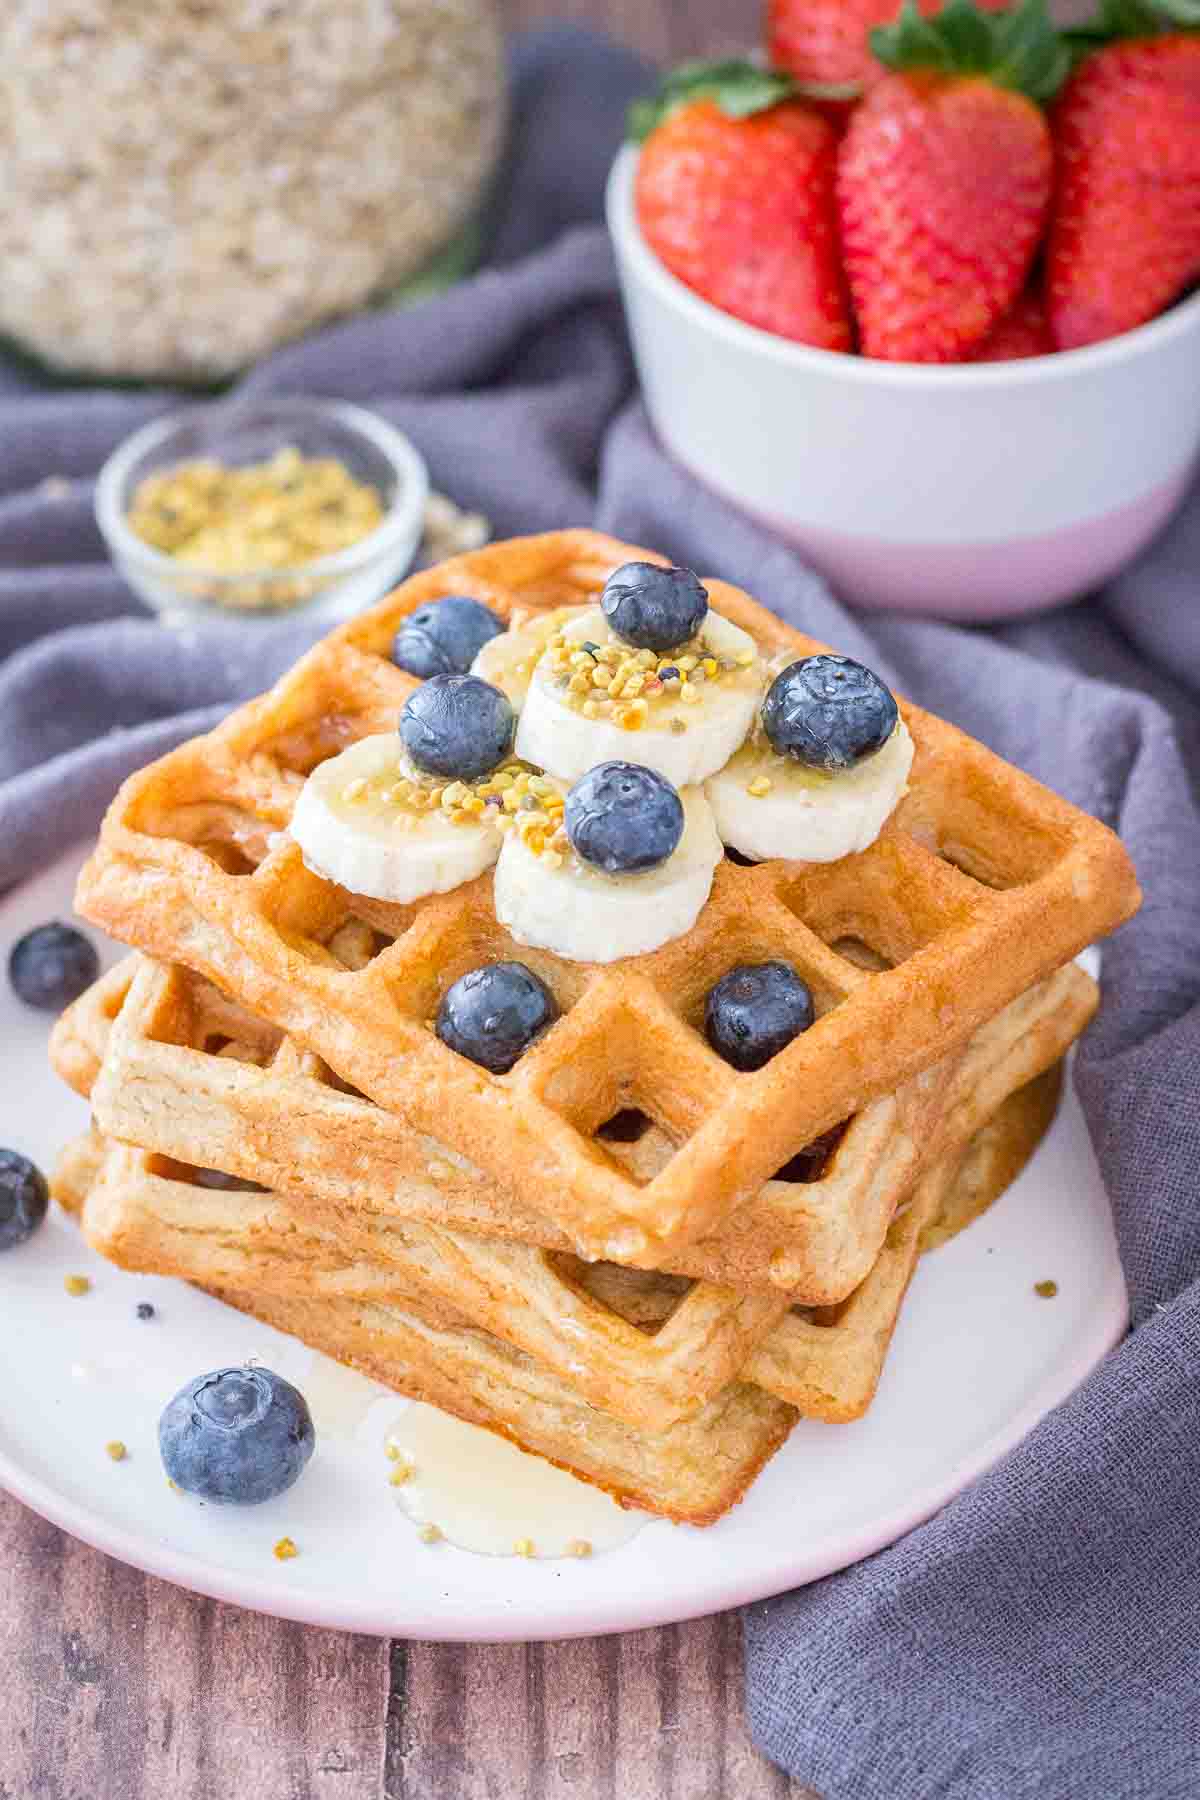 Oatmeal Waffles topped with banana slices and blueberries